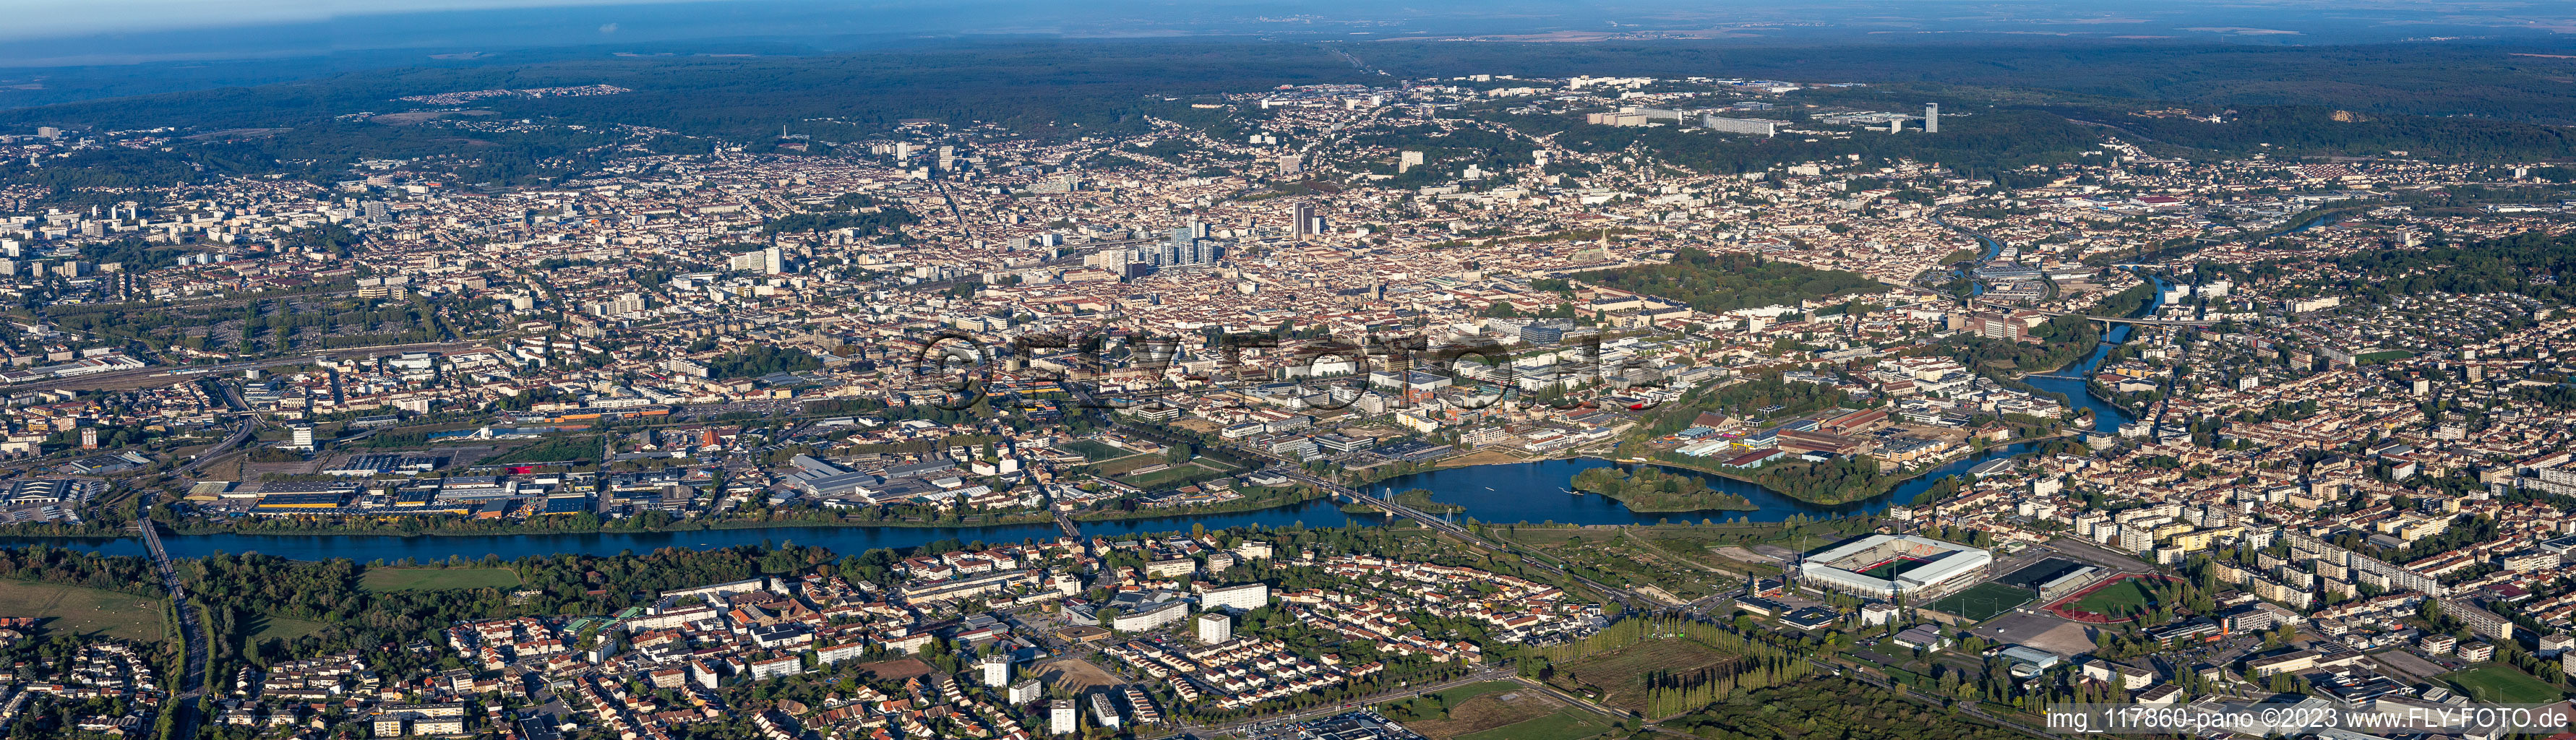 Aerial view of Panoramic perspective of the city area with outside districts and inner city area in Nancy in Grand Est, France